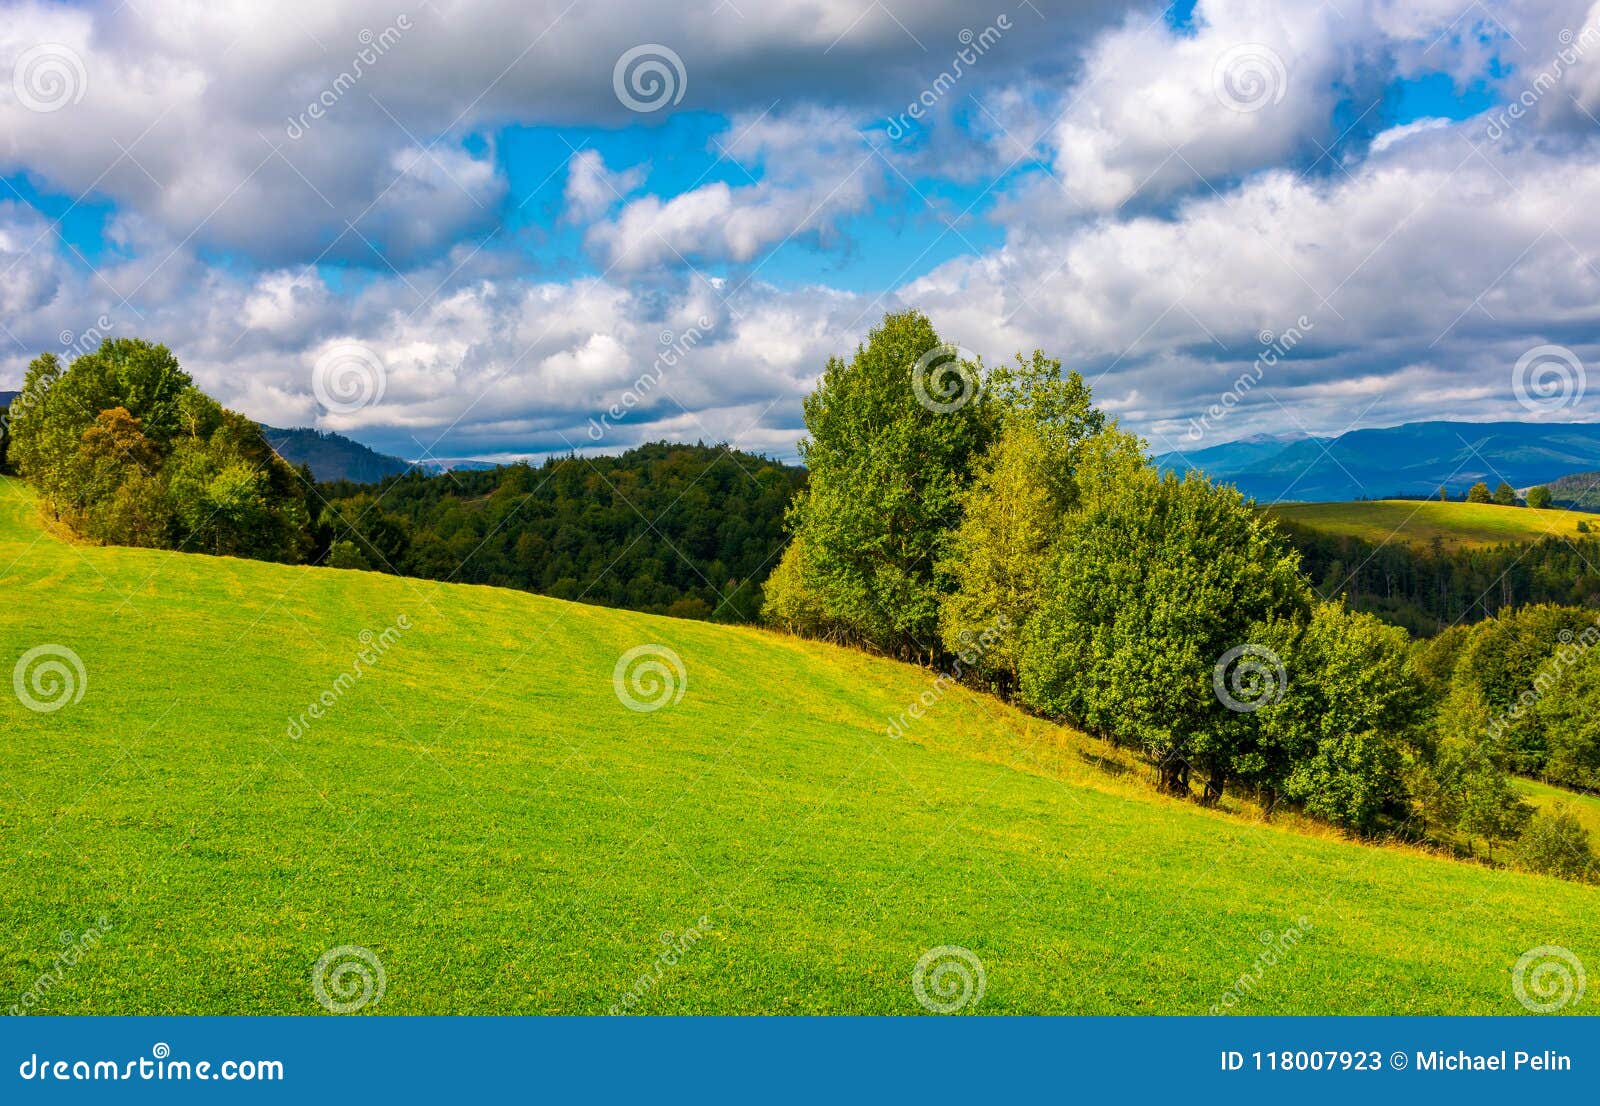 Hillside Photos and Images